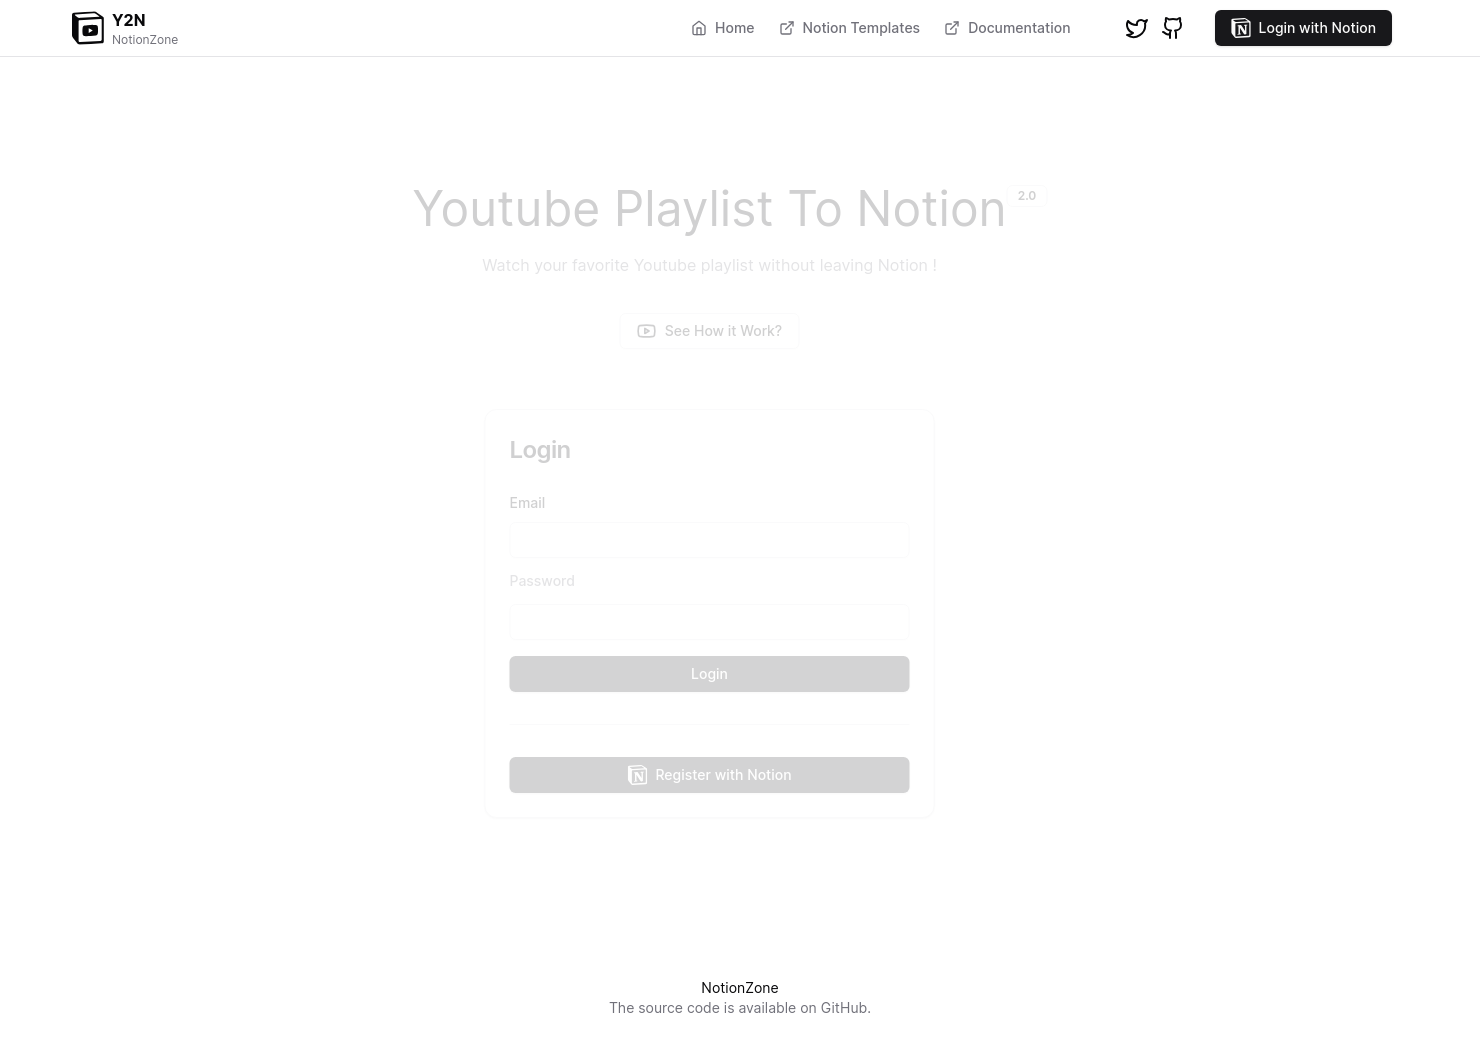 startuptile Youtube Playlist To Notion-Watch your favorite Youtube playlist without leaving Notion